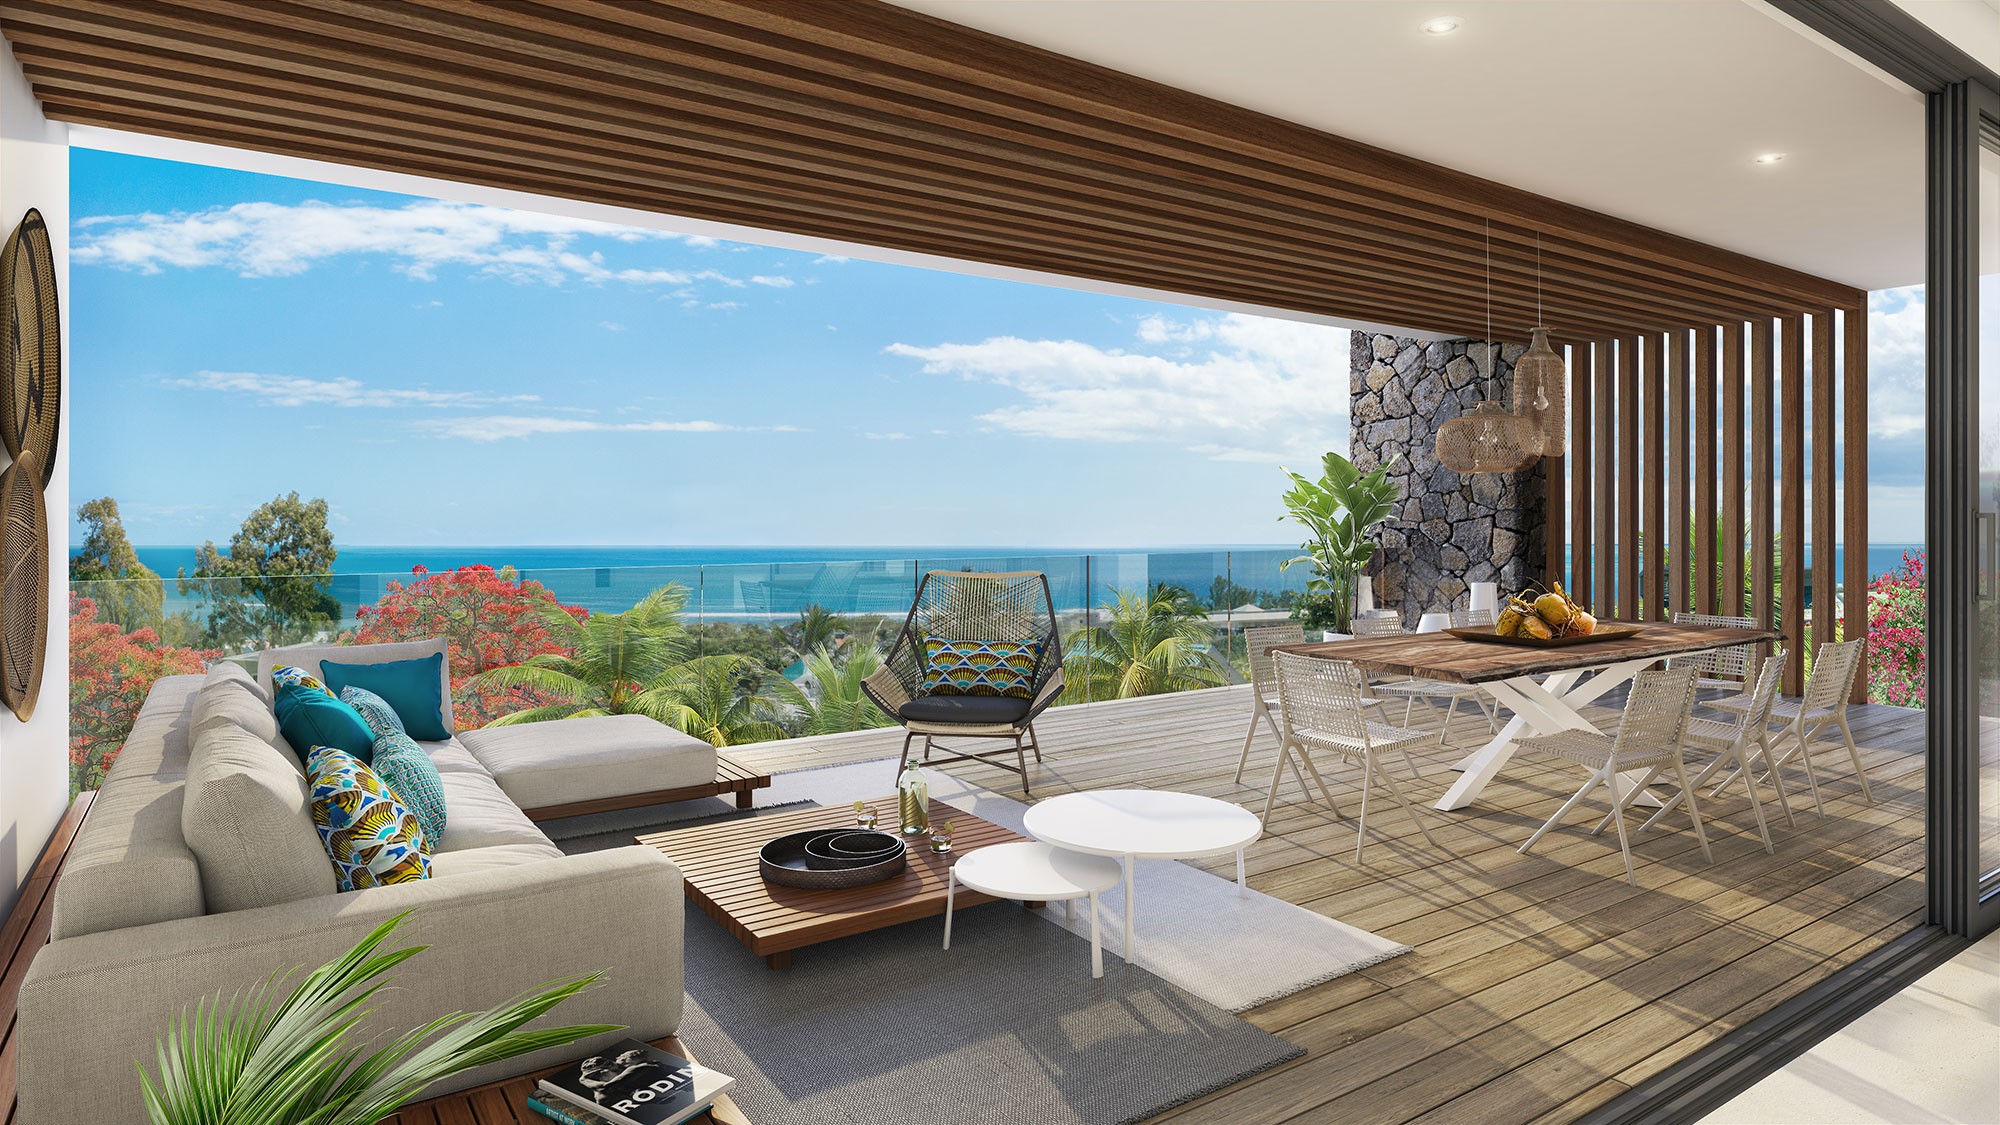 Sileview apartments, duplexes and penthouses in a prestigious residence in Tamarin, west coast of Mauritius. Located on the heights of Tamarin, this project of 10 apartments combines space, comfort, refinement and tranquility.